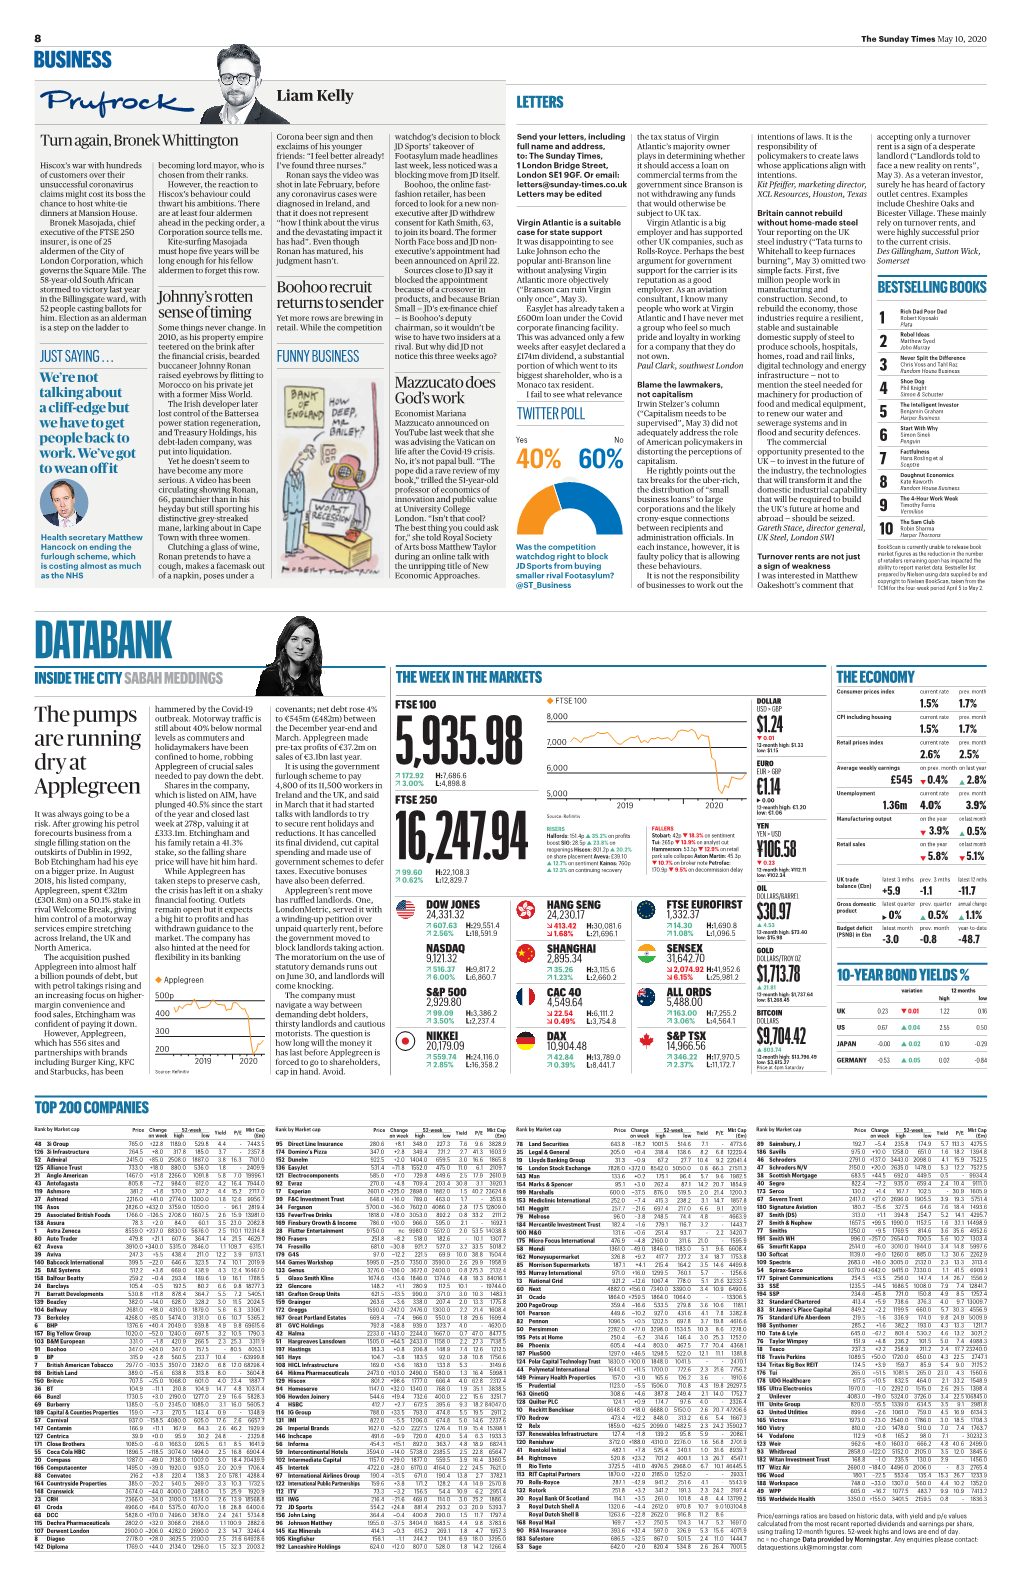 DATABANK INSIDE the CITY SABAH MEDDINGS the WEEK in the MARKETS the ECONOMY Consumer Prices Index Current Rate Prev